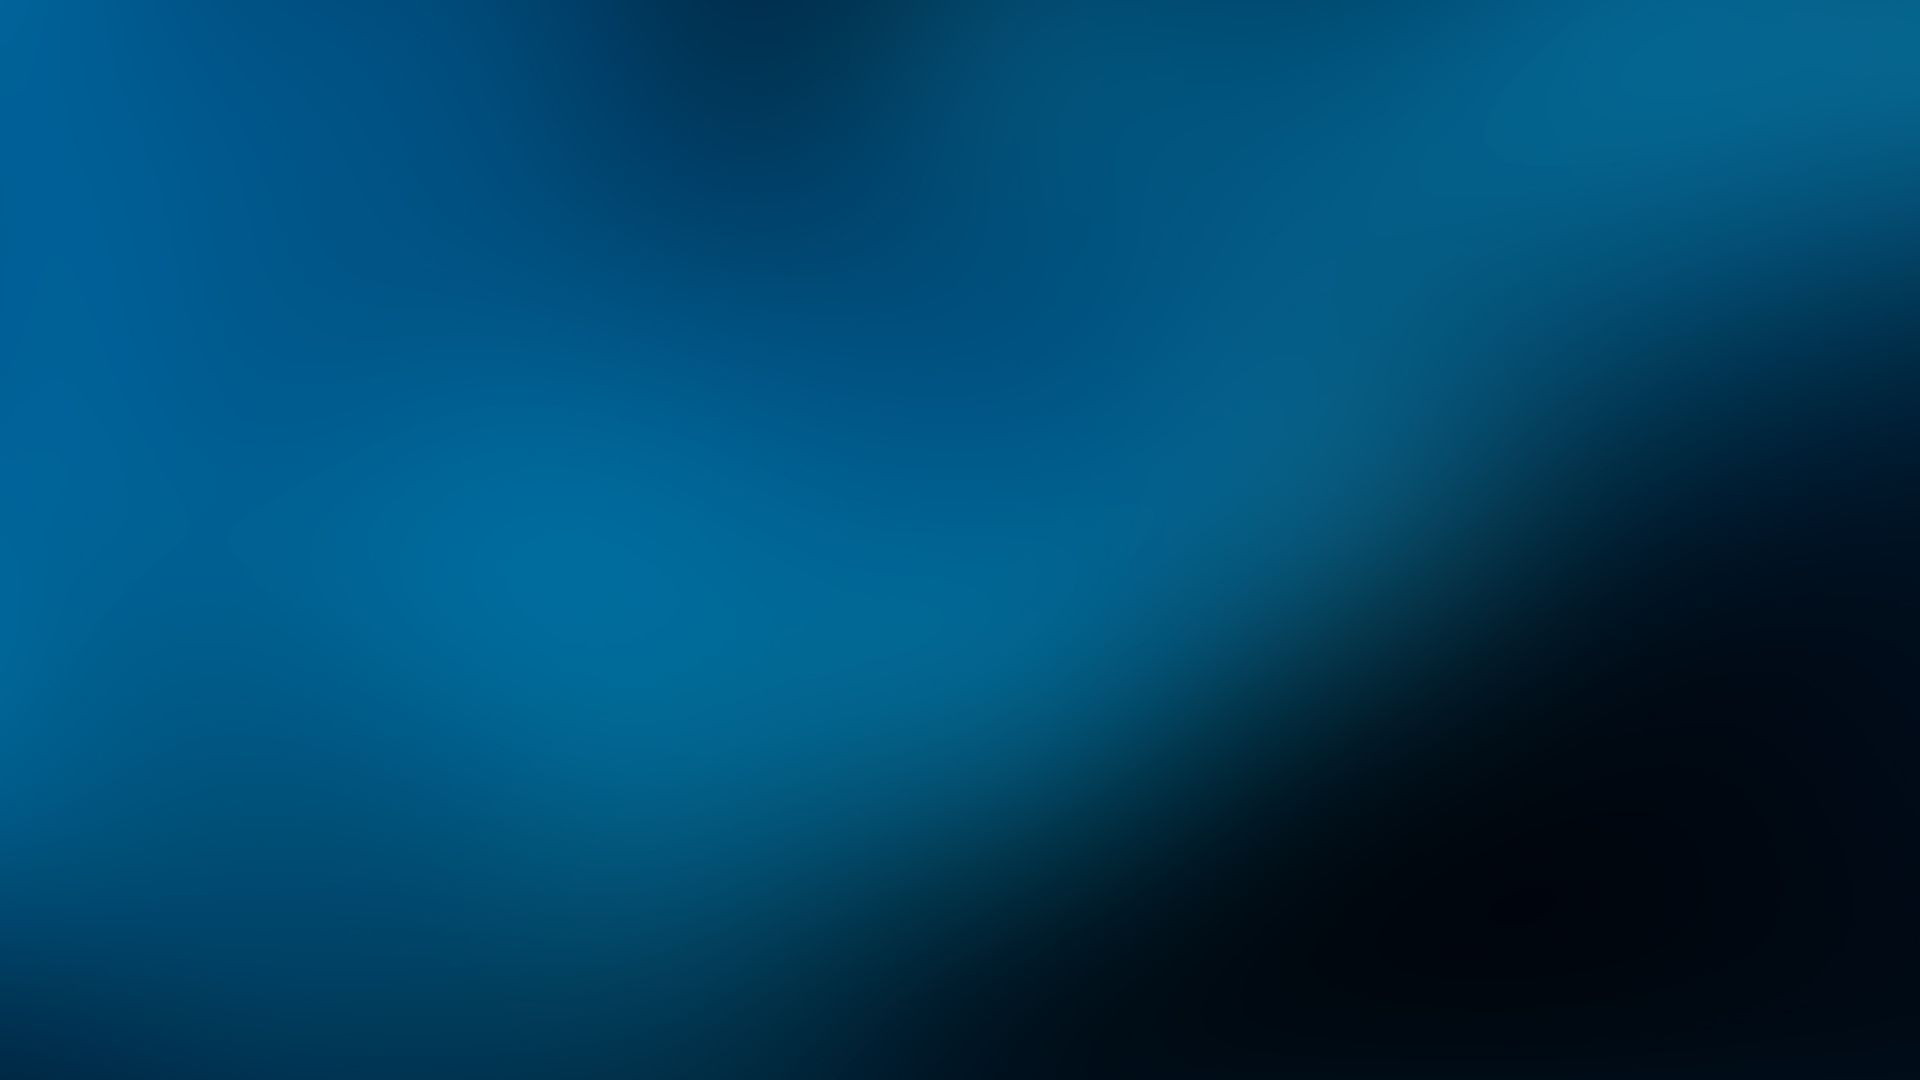 Desktop Wallpaper Abstract, Blue And Black, Gradient, Blur, Hd Image,  Picture, Background, 9g7rov